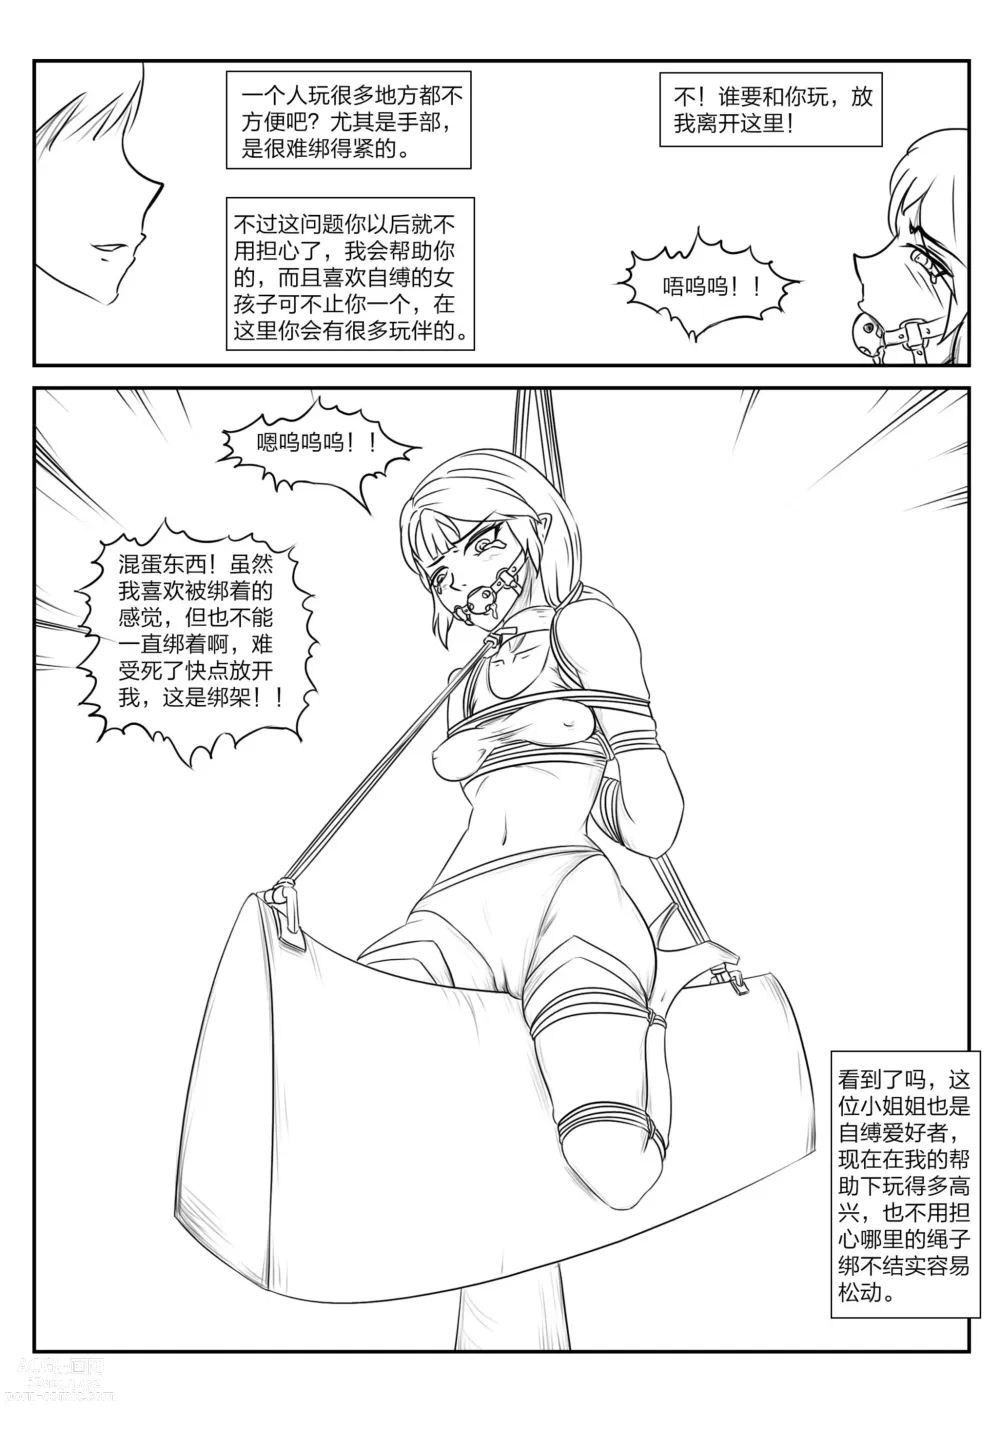 Page 43 of doujinshi The crisis in public self bondage